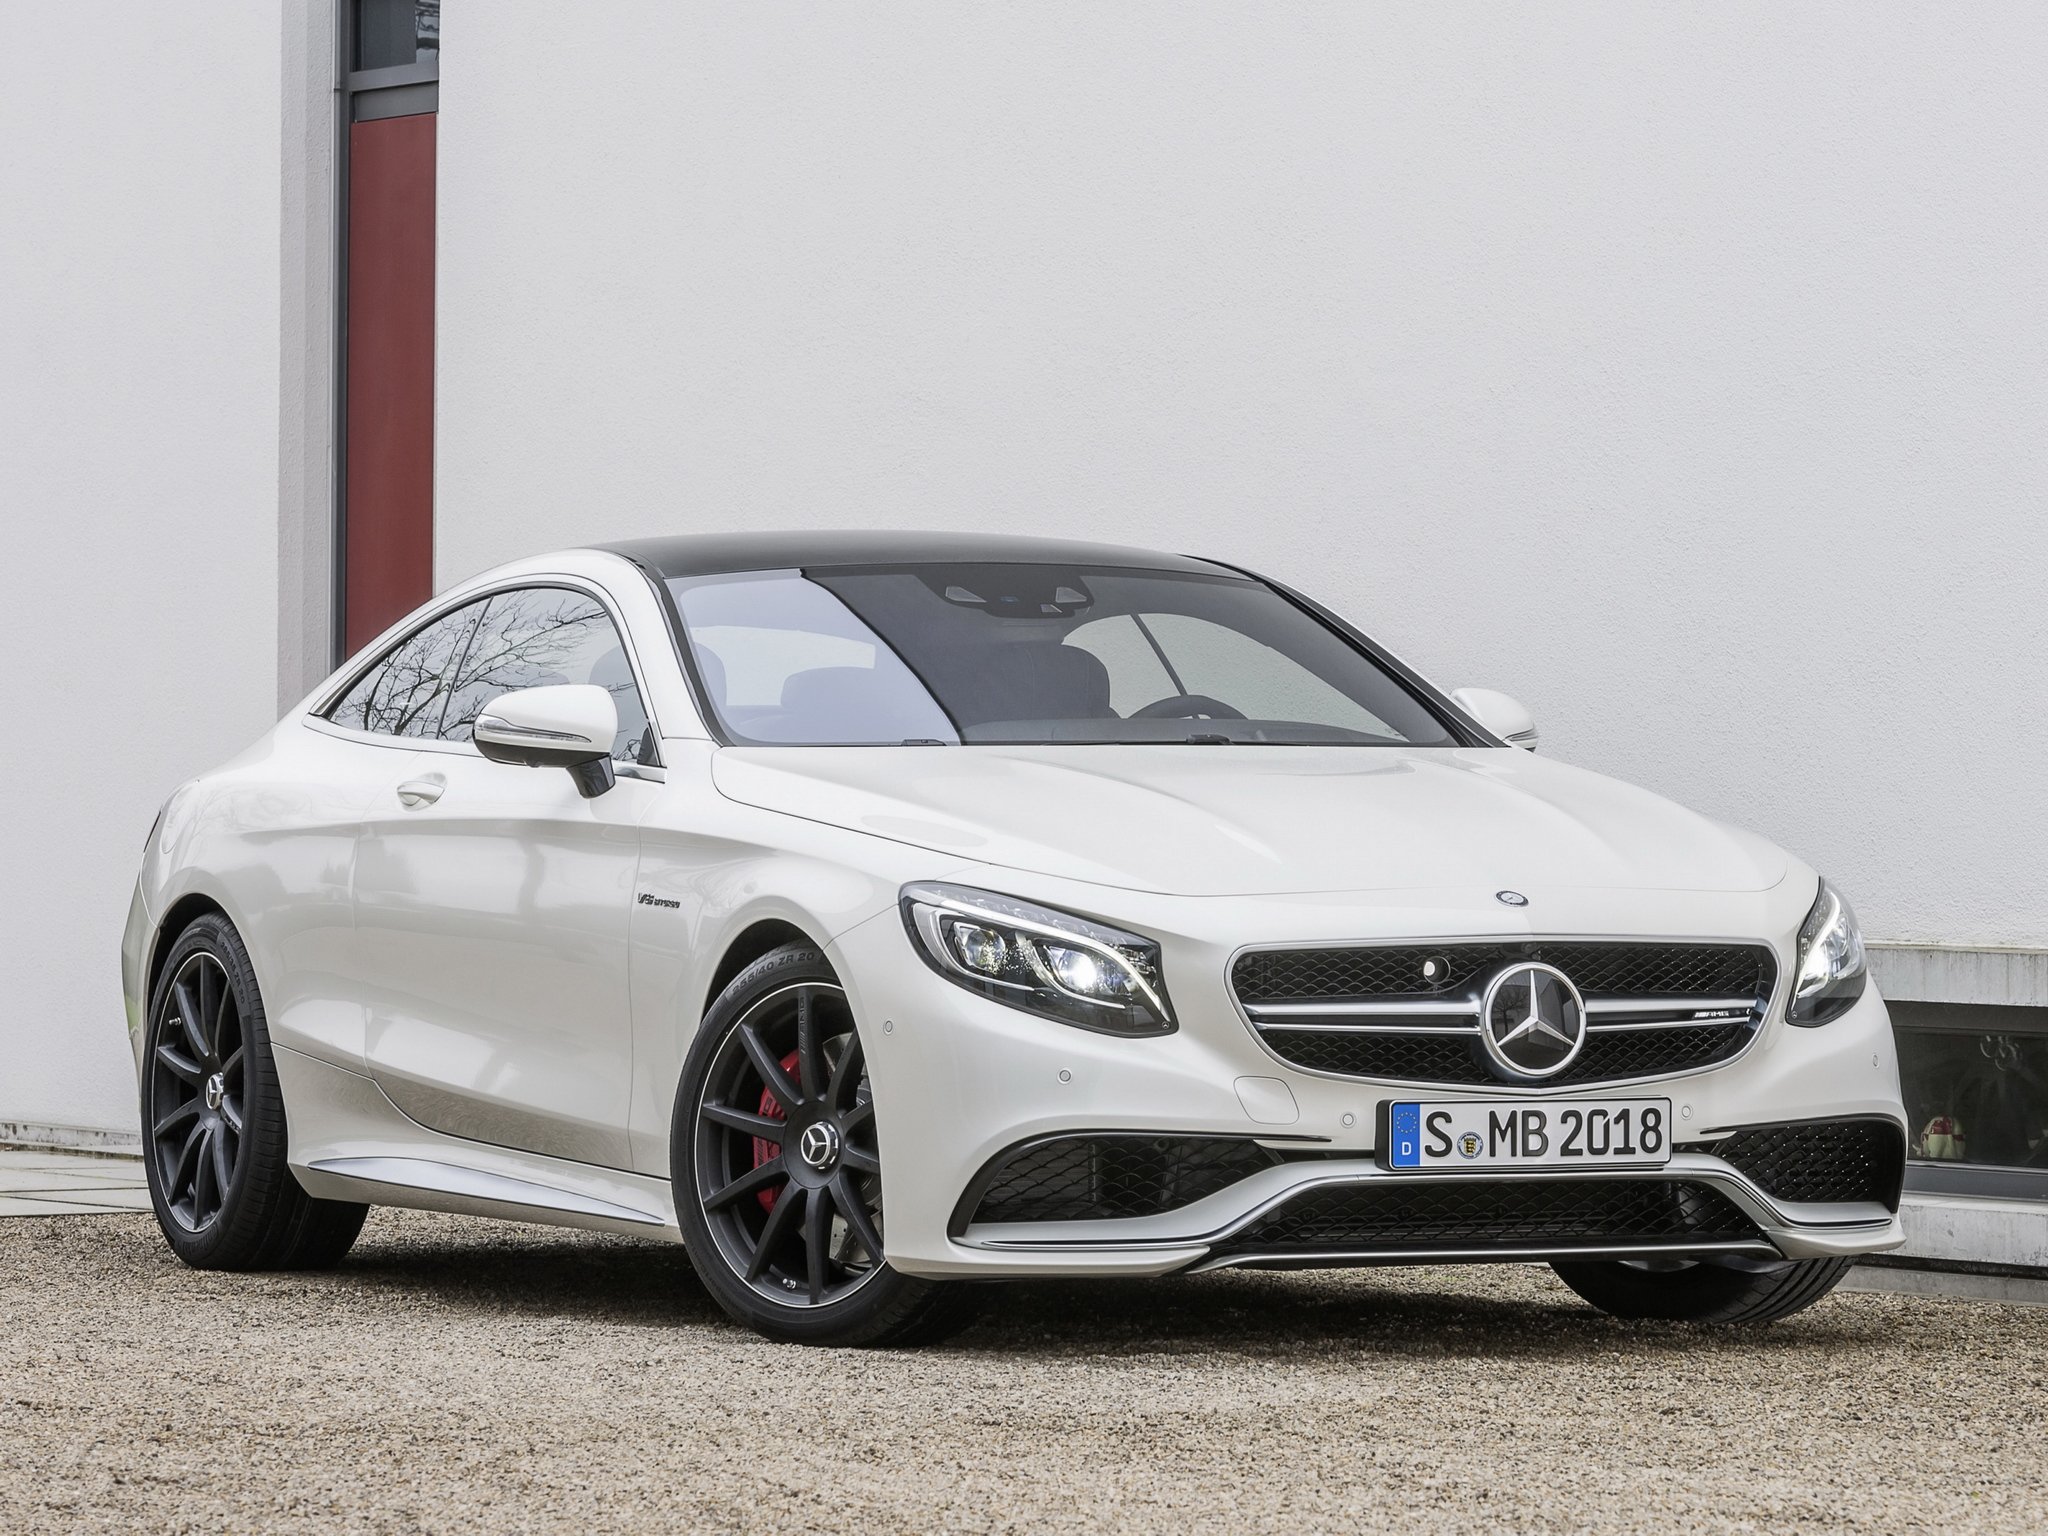 2014, Mercedes, Benz, S63, Amg, Coupe,  c217 Wallpaper